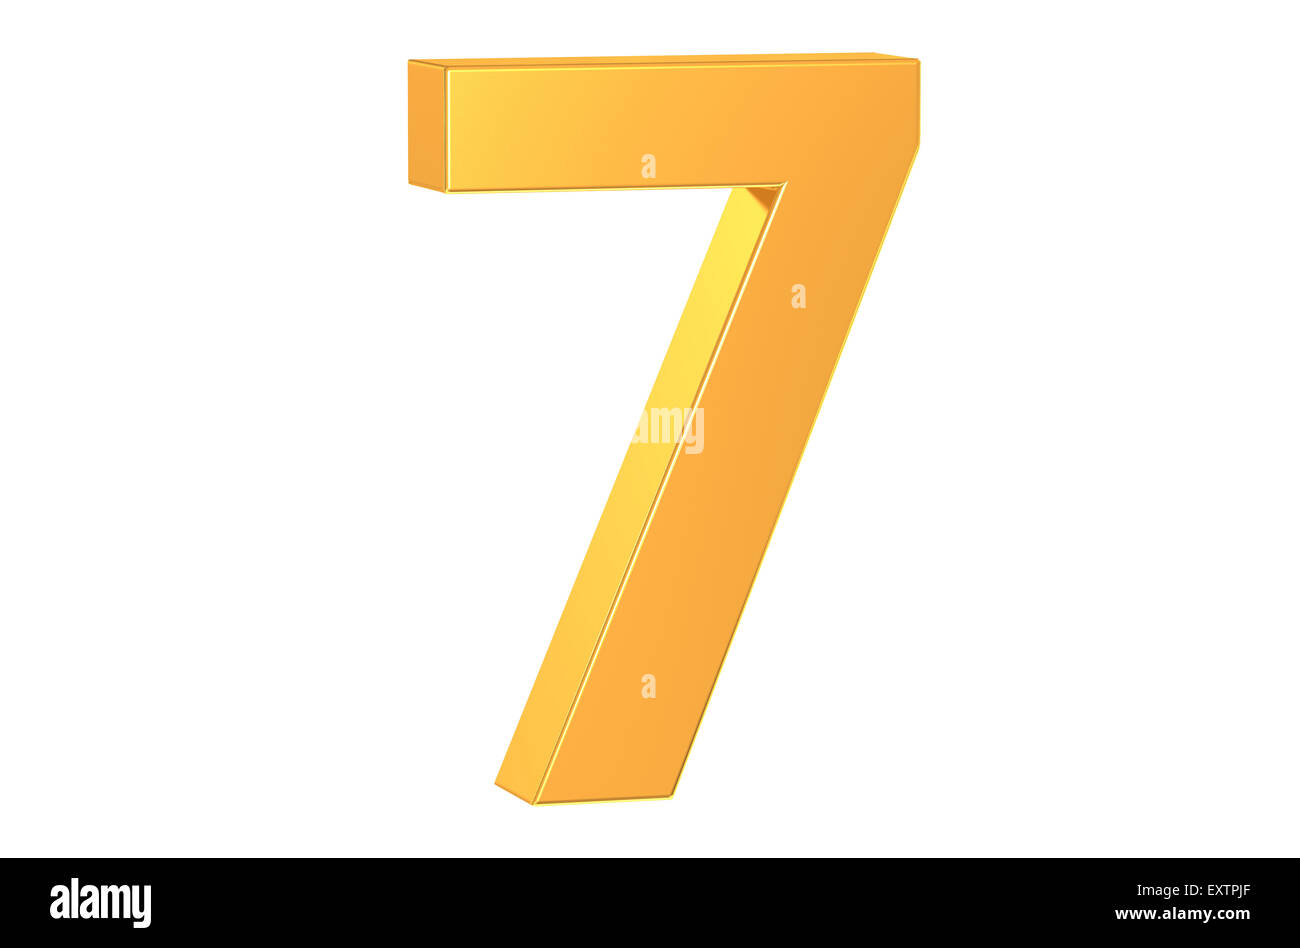 3D golden number 7 isolated on white background Stock Photo